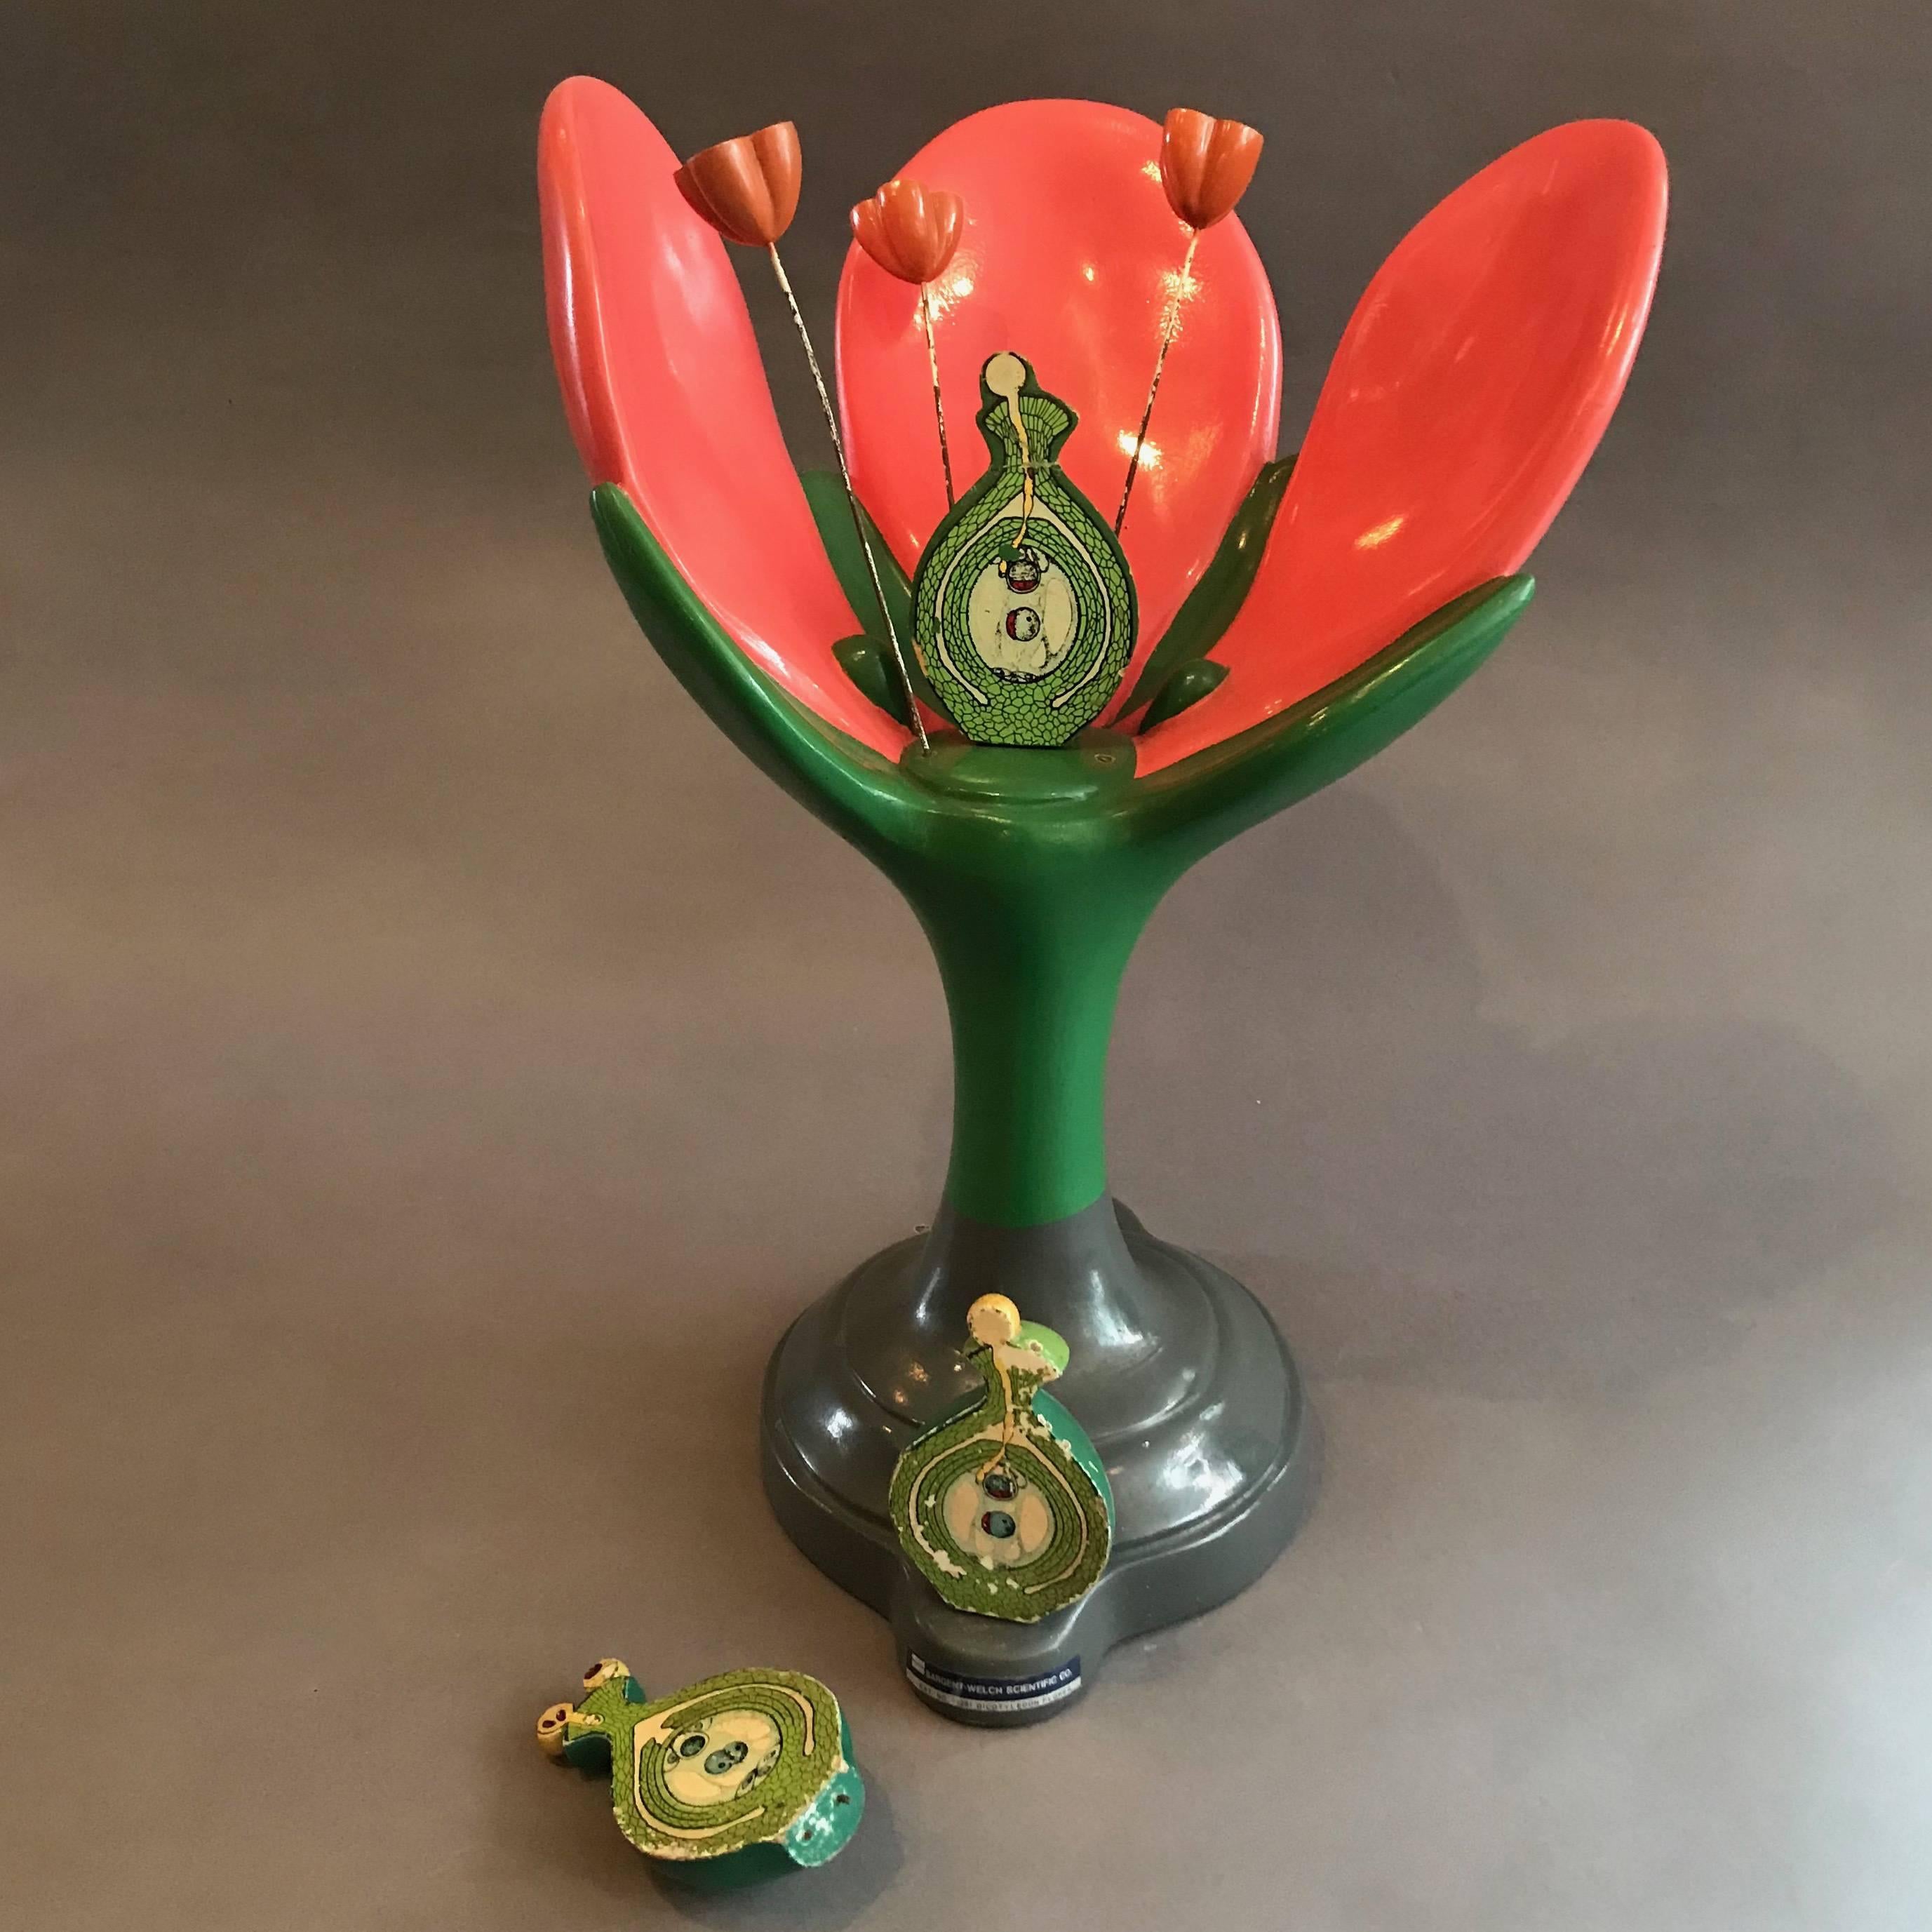 Painted resin composite, scientific, educational, botanical model of a dicotyledon flower with removable parts.